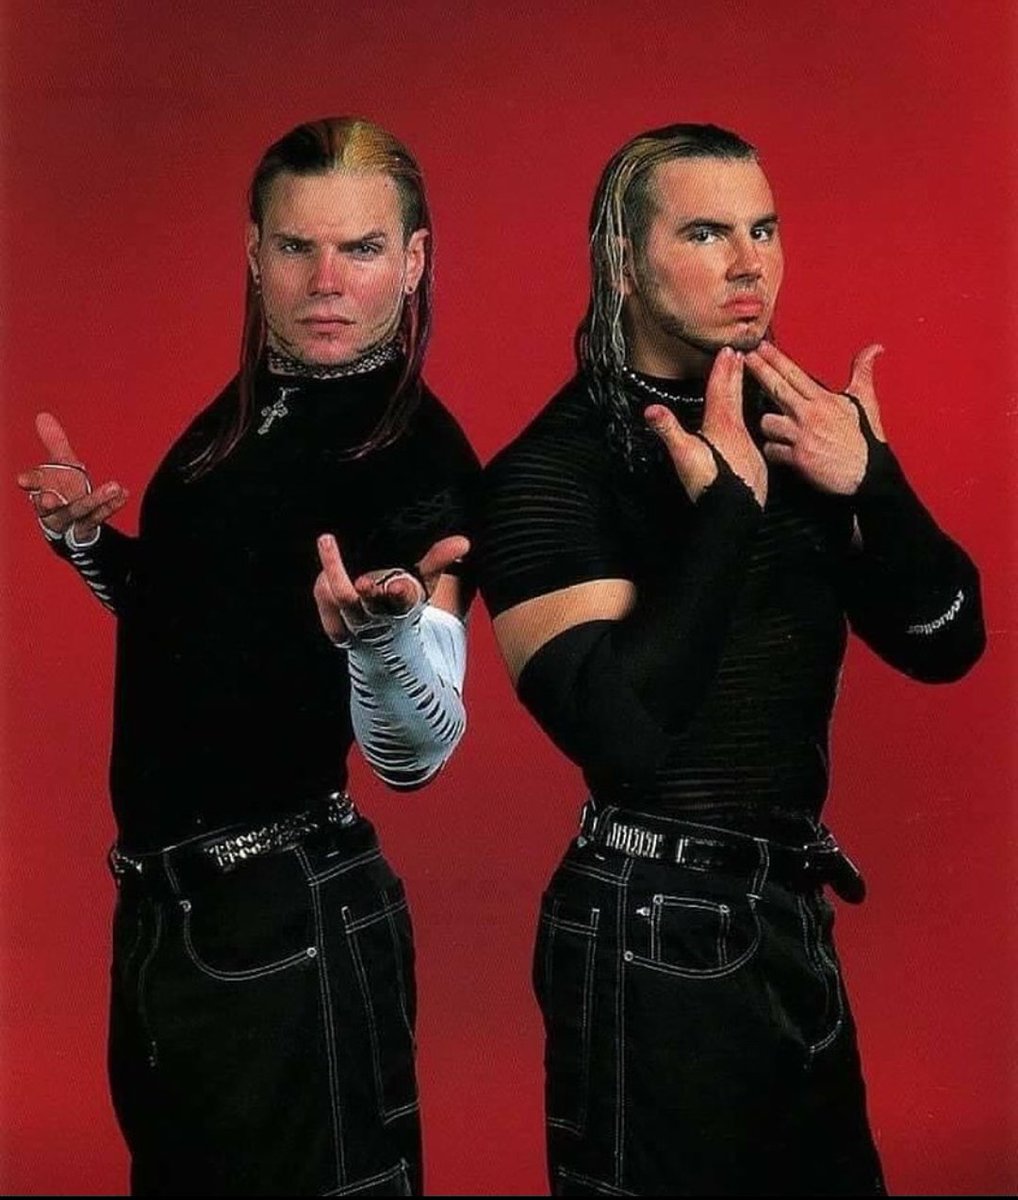 If the matt and Jeff hardy weren't at one point your favorite tag team champions then I cannot trust your judgment https://t.co/pI1Wi89IqS